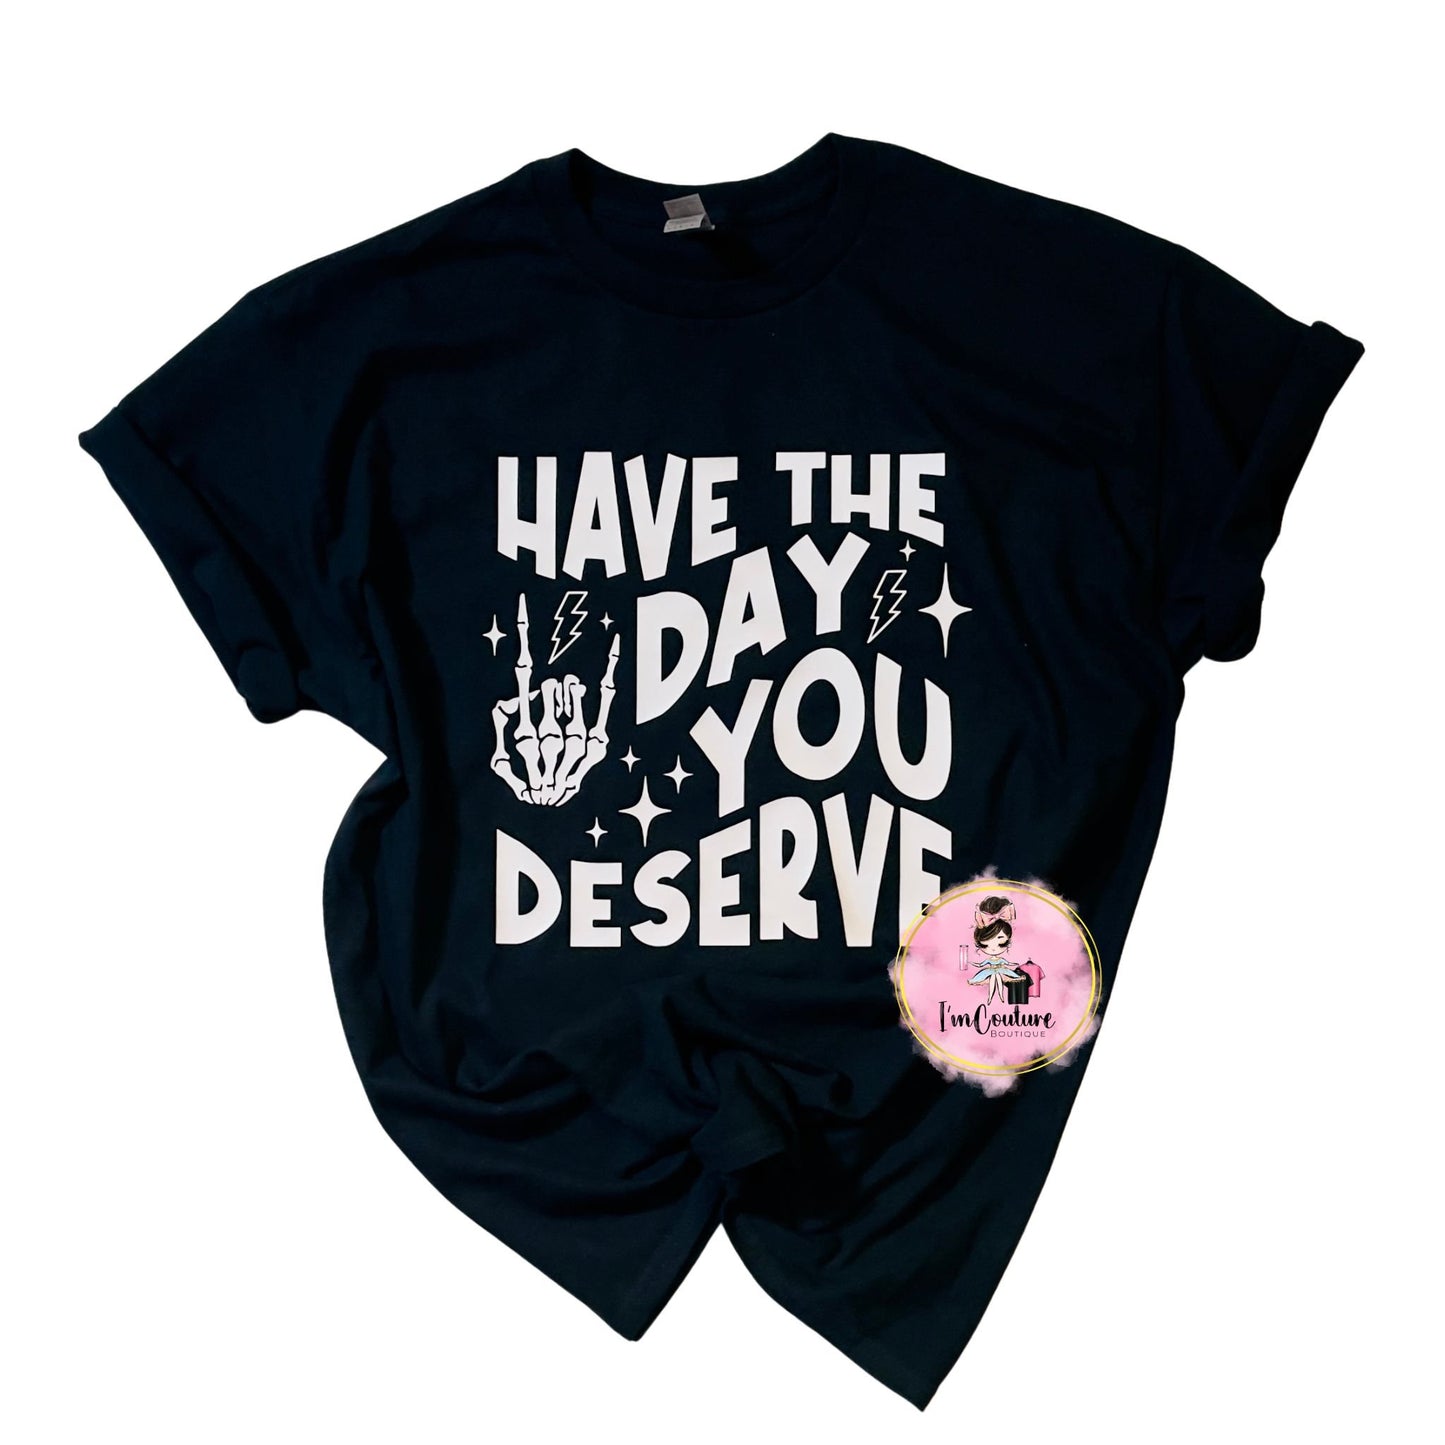 Have the day you deserve Tshirt